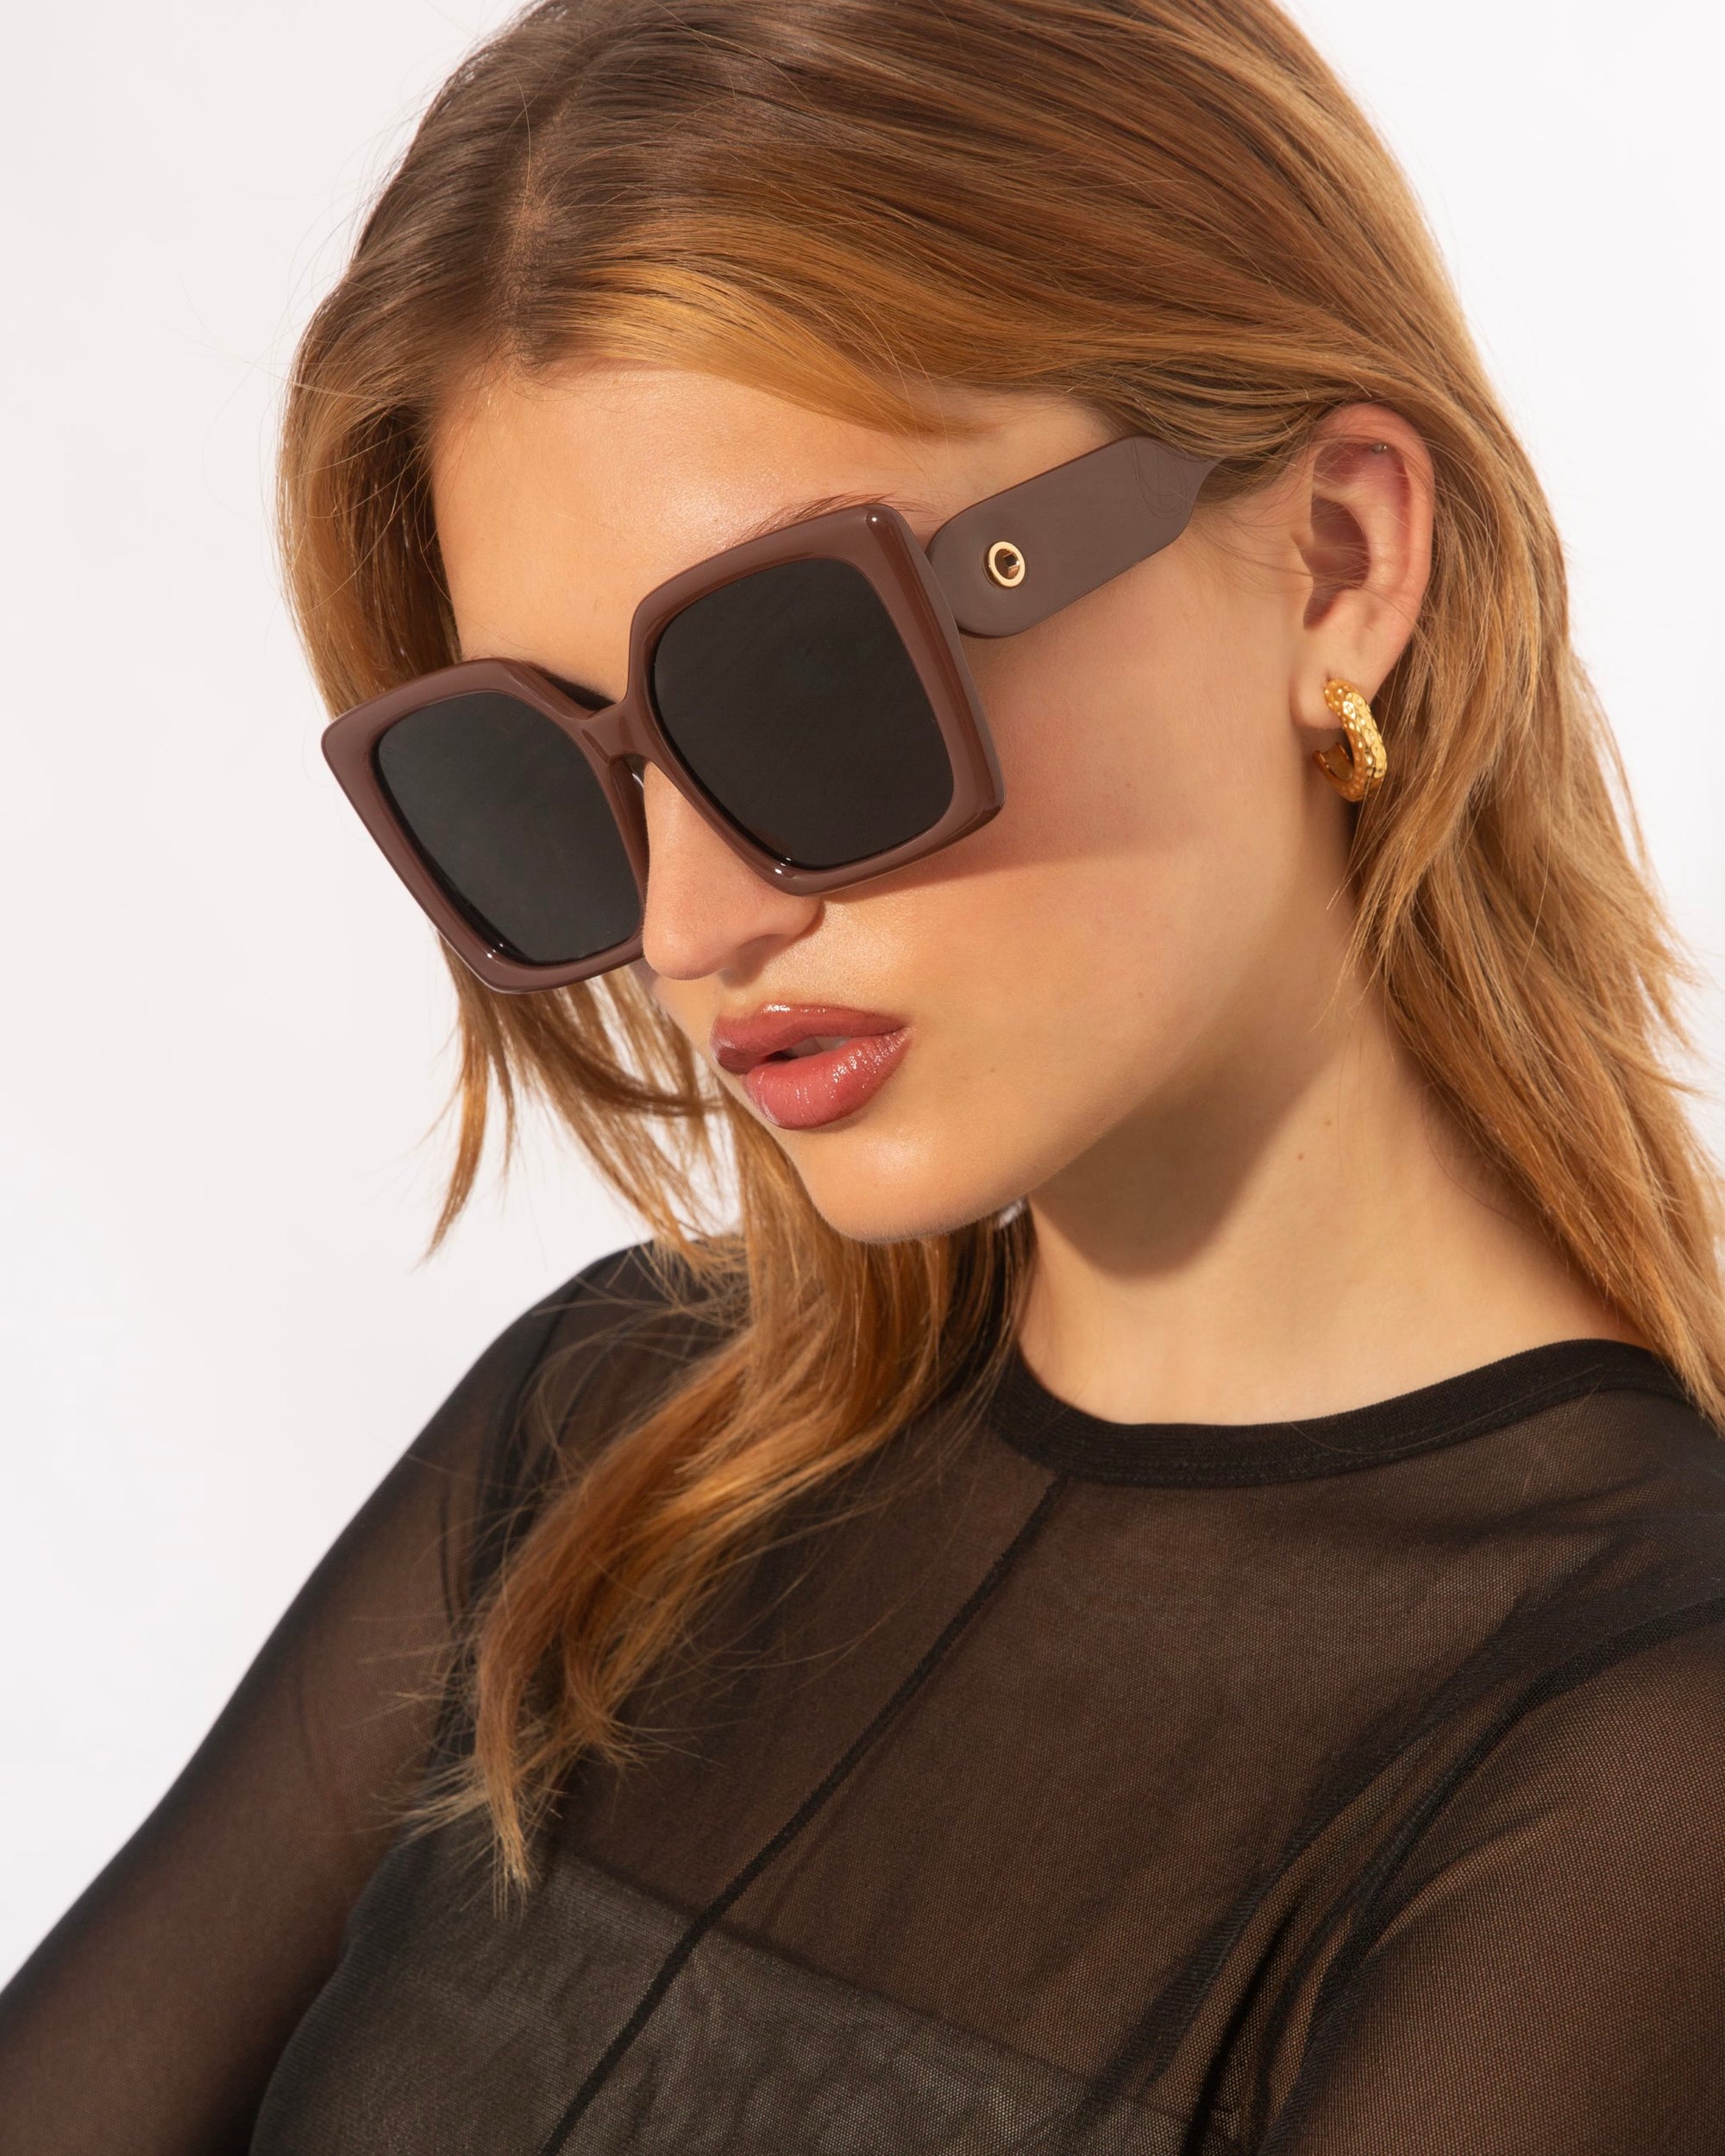 A person with shoulder-length light brown hair, wearing elegant eyewear characterized by oversized soft-square silhouettes and a pair of gold hoop earrings, is looking downward. The person is dressed in a sheer black top with a high neckline. The background is plain white. They are wearing Eos by For Art's Sake®.